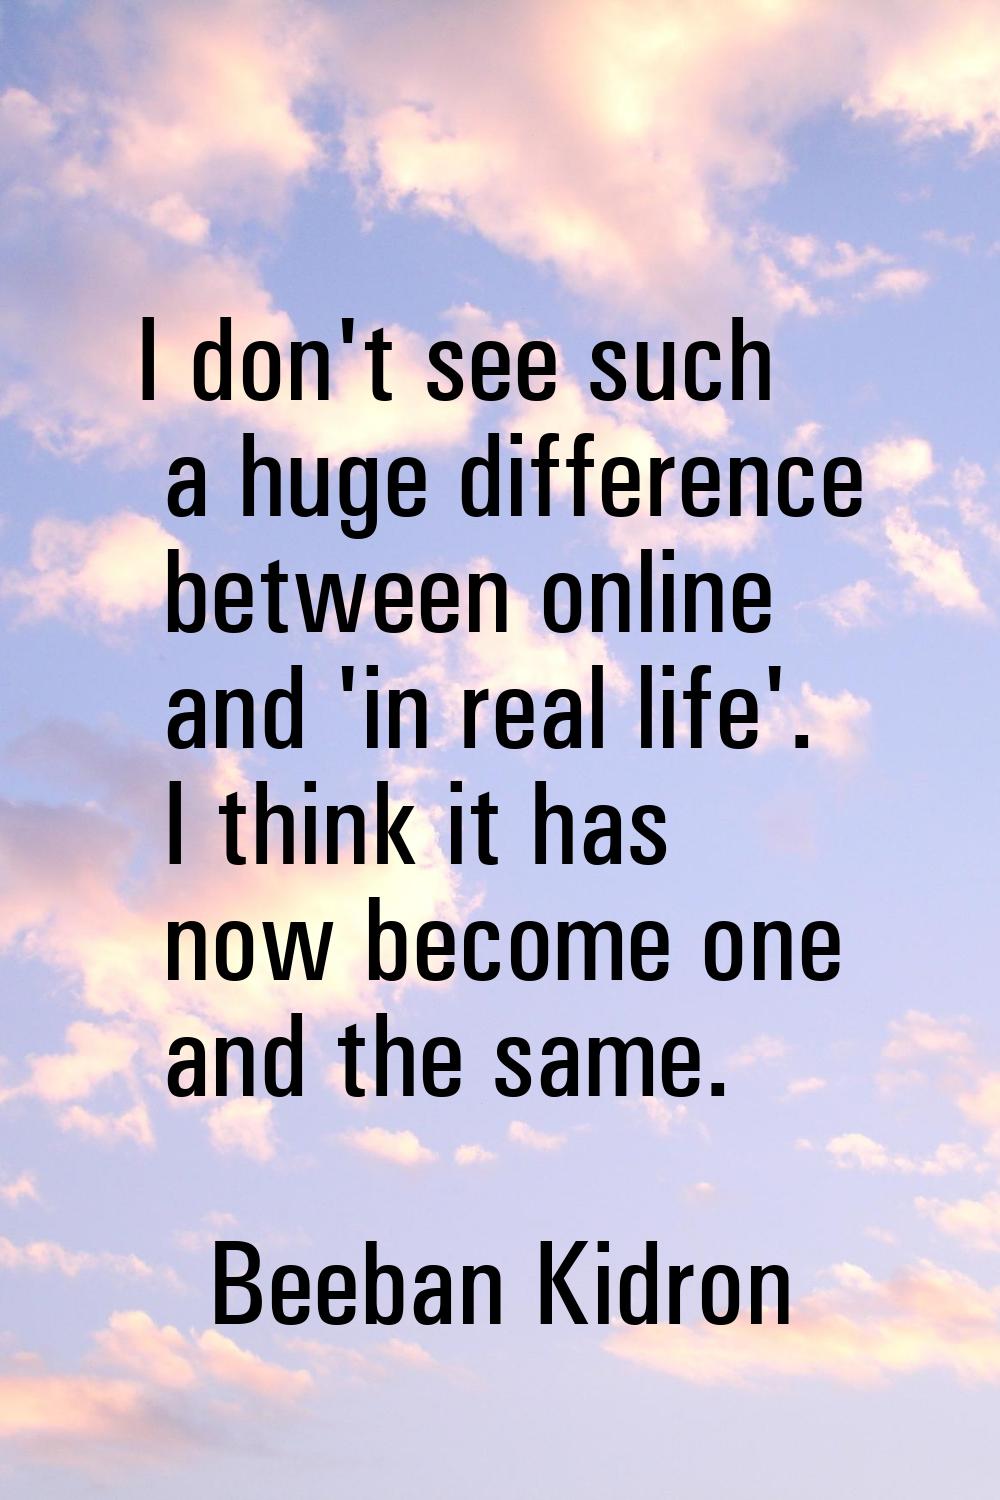 I don't see such a huge difference between online and 'in real life'. I think it has now become one